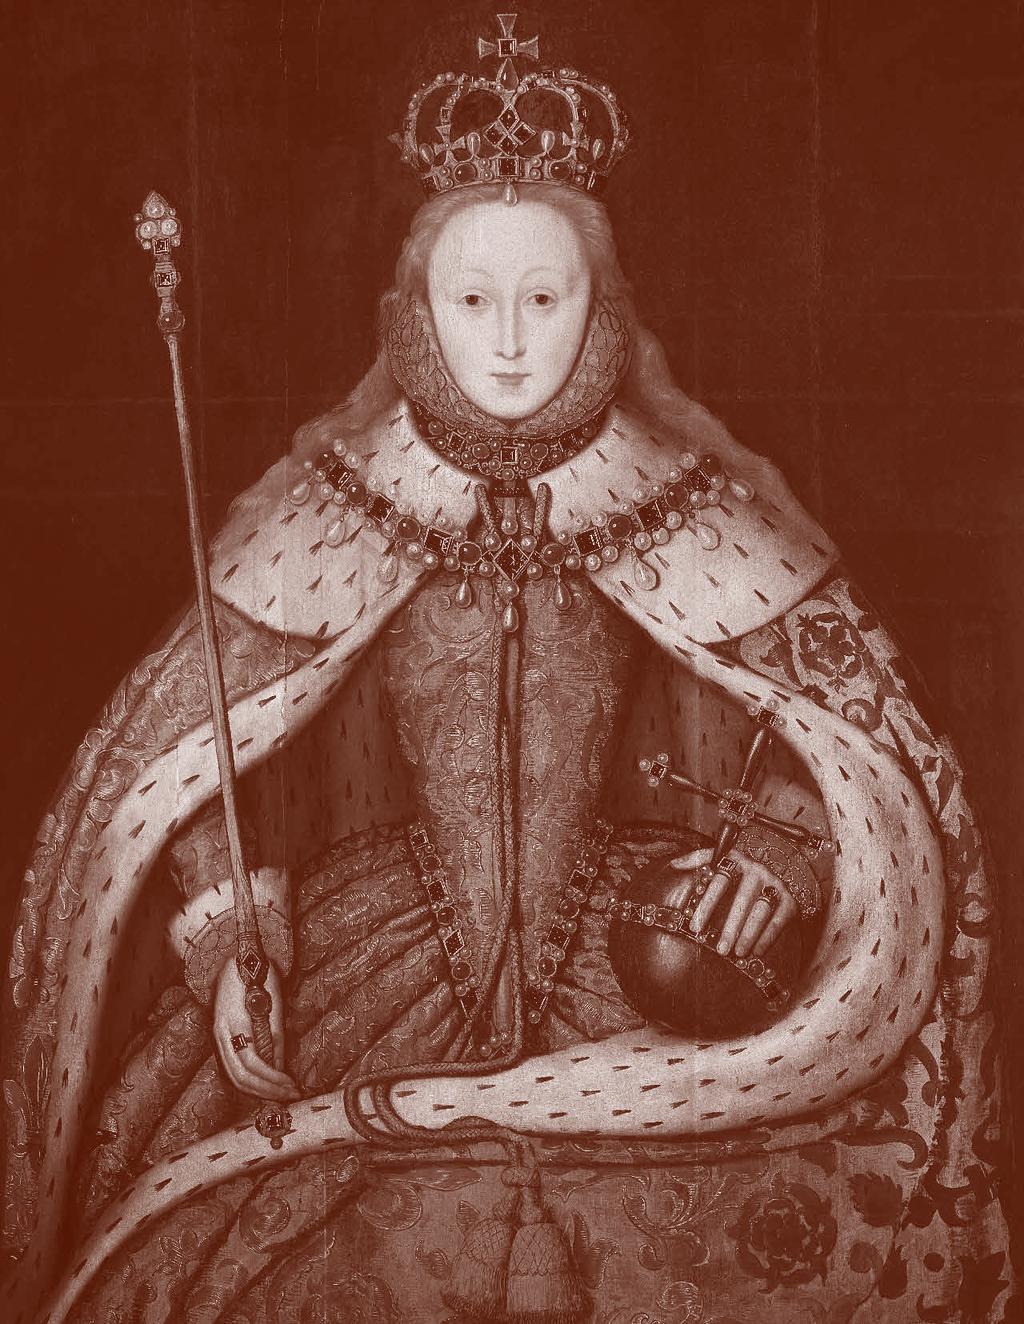 England in the Golden Age Table of Contents Introduction... 1 England in the Golden Age Sample Pacing Guide... 14 Chapter 1 Elizabeth I... 16 Chapter 2 Britannia Rules the Waves.